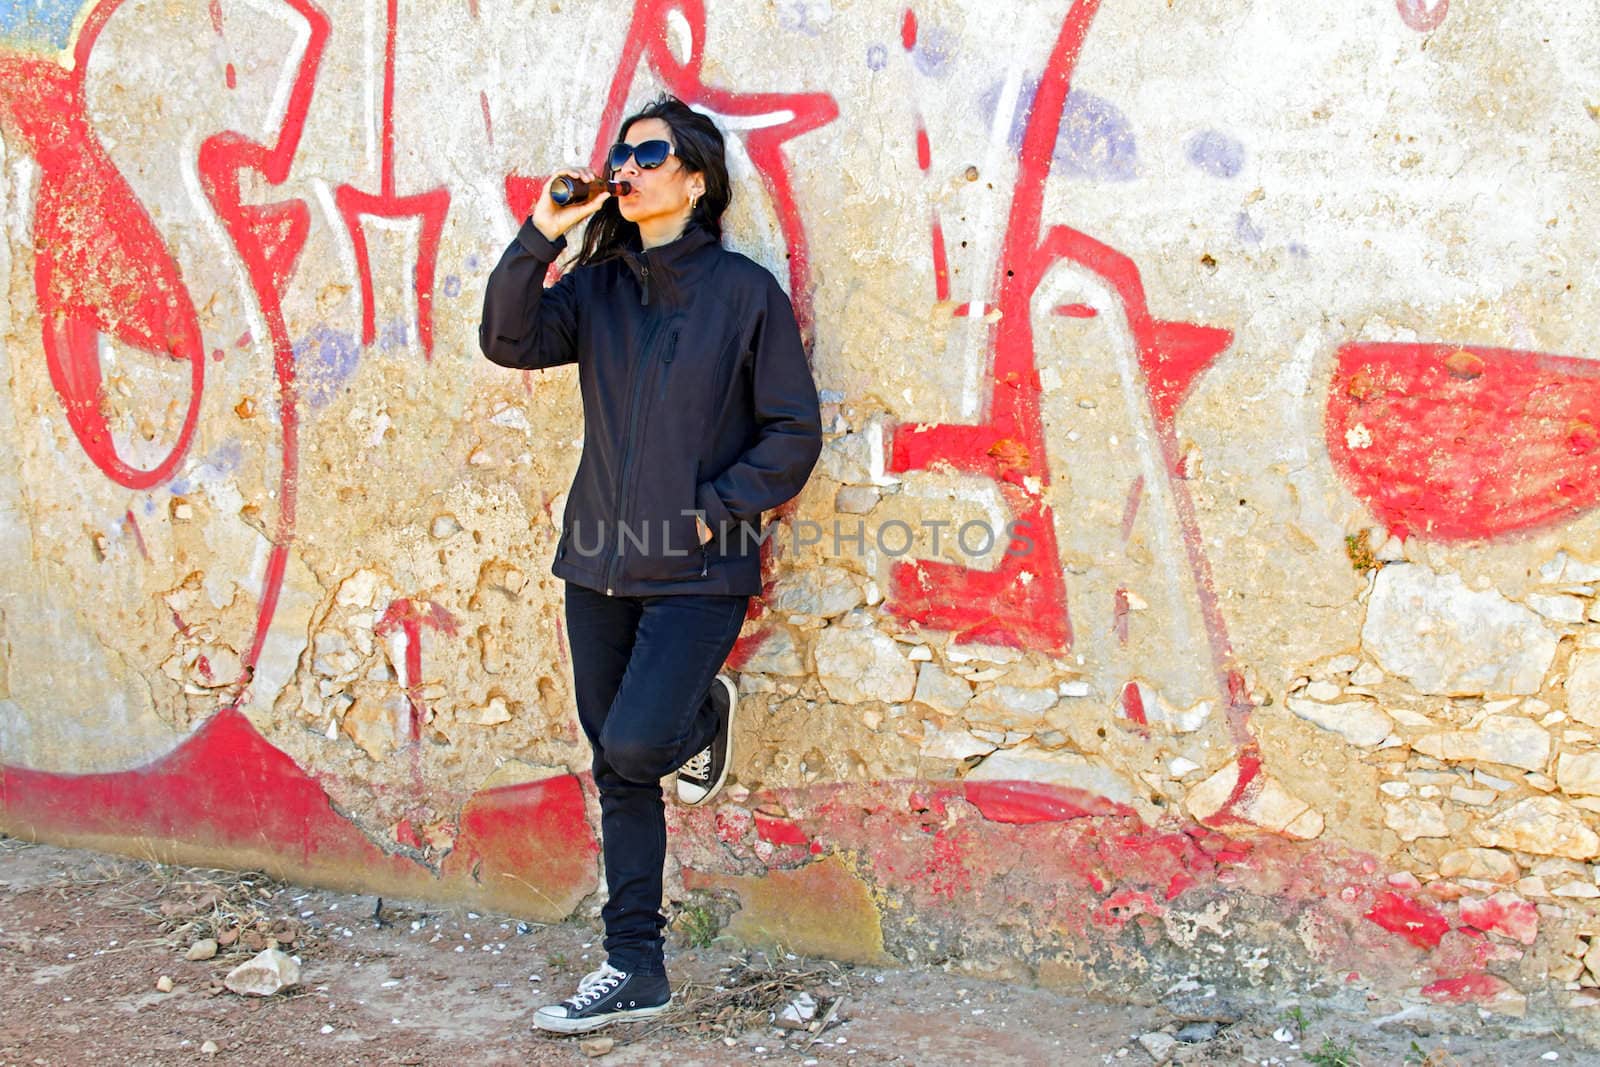 Woman in black drinking beer at a graffiti wall by devy